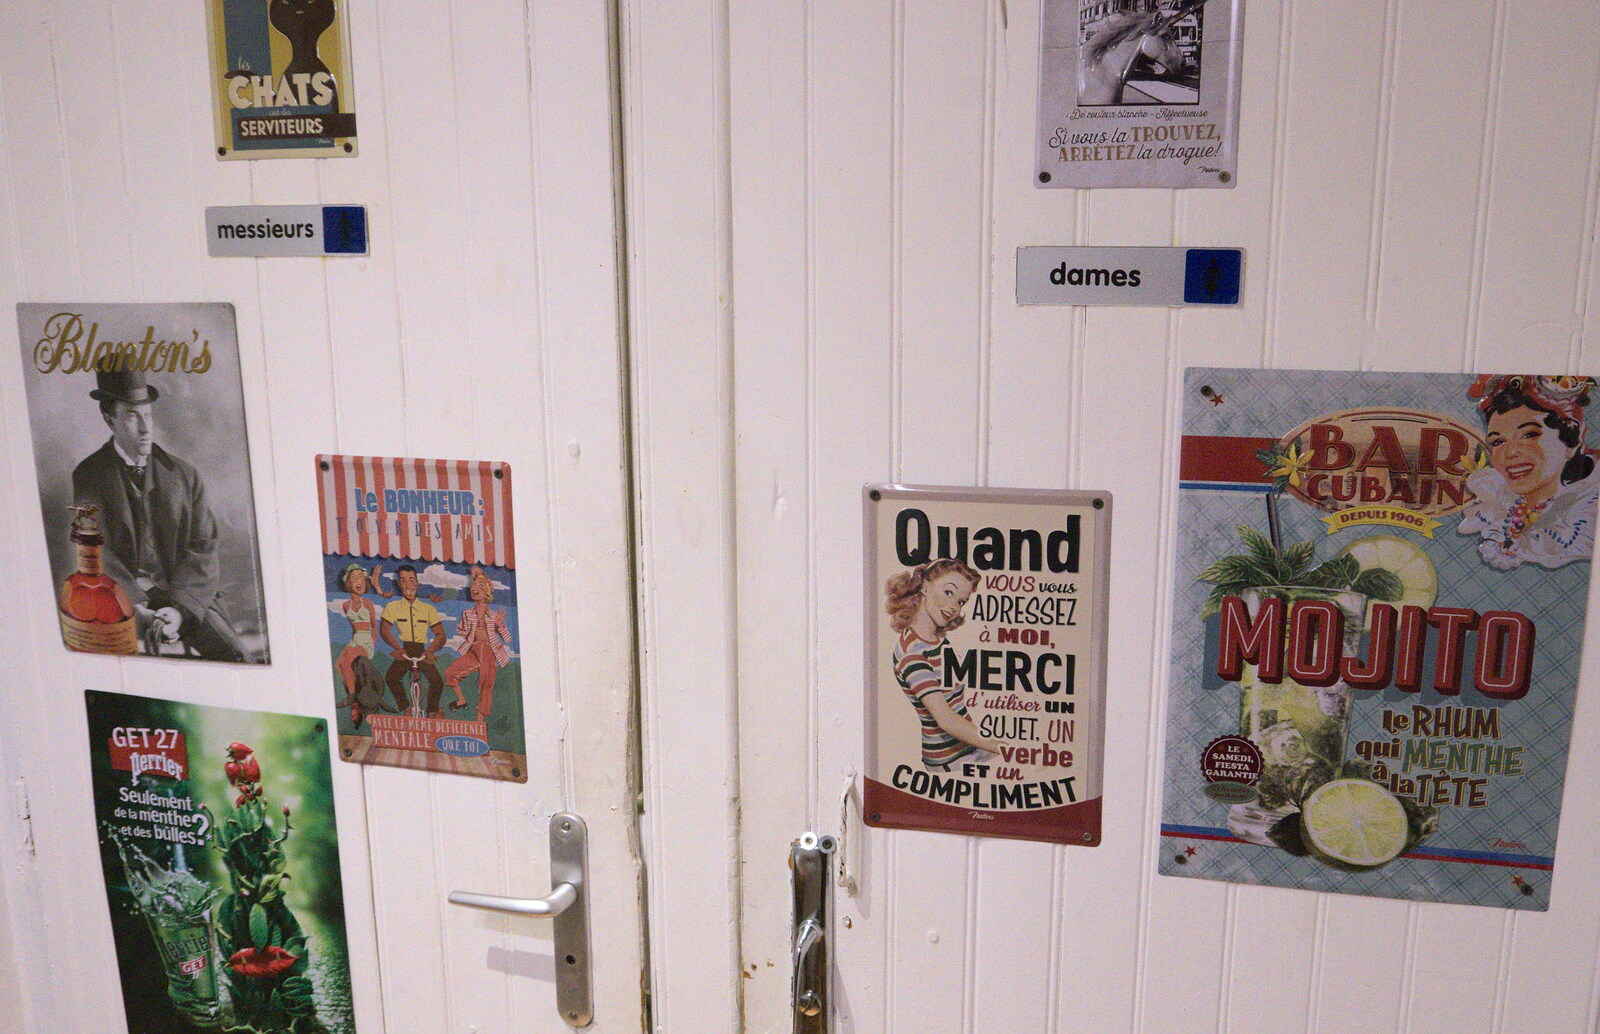 Old posters on the door from Le Gouffre Géant and Grotte de Limousis, Petanque and a Lightning Storm, Languedoc, France - 12th August 2018